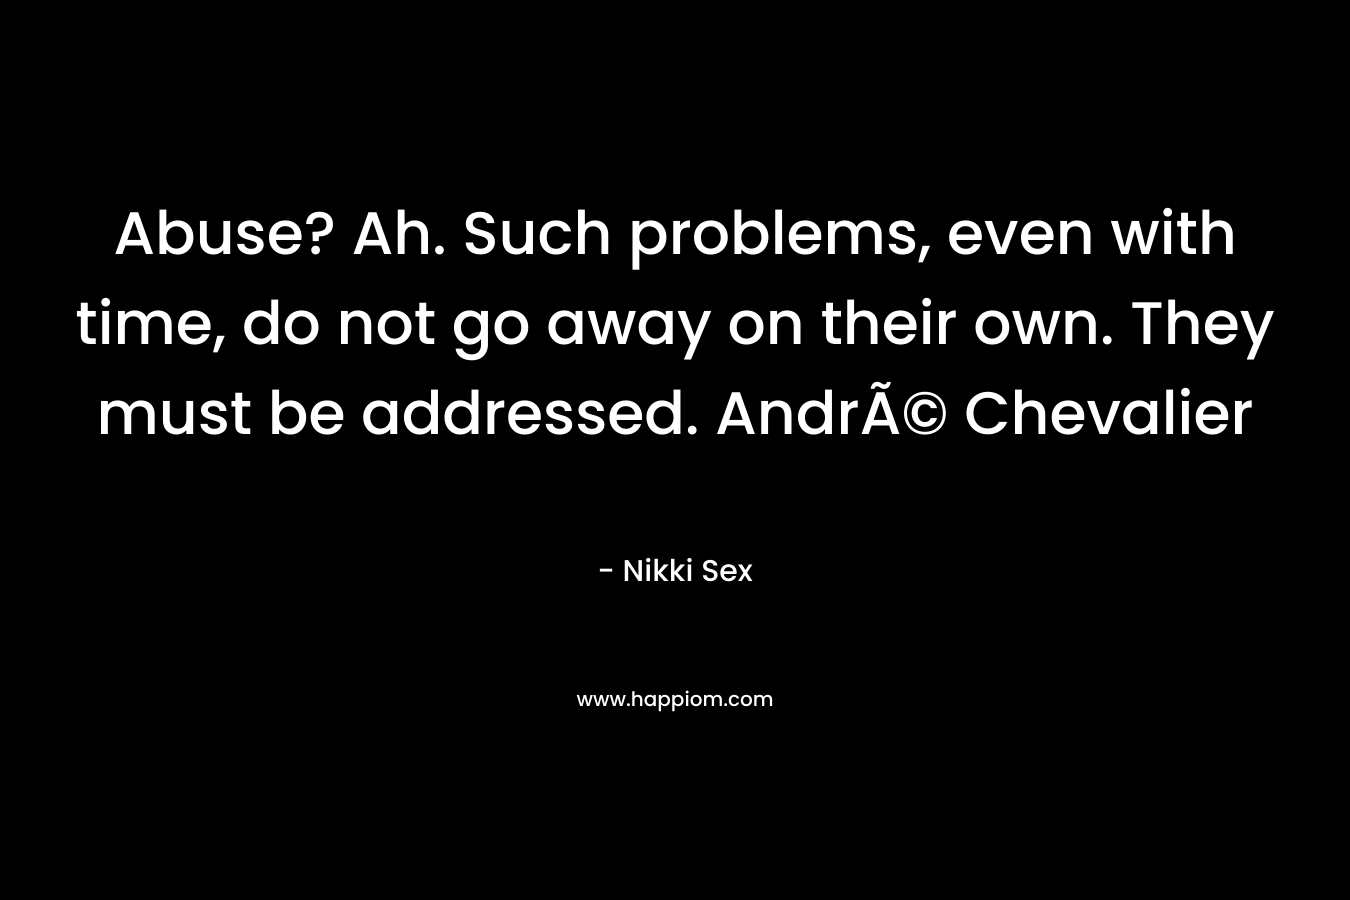 Abuse? Ah. Such problems, even with time, do not go away on their own. They must be addressed. AndrÃ© Chevalier – Nikki Sex